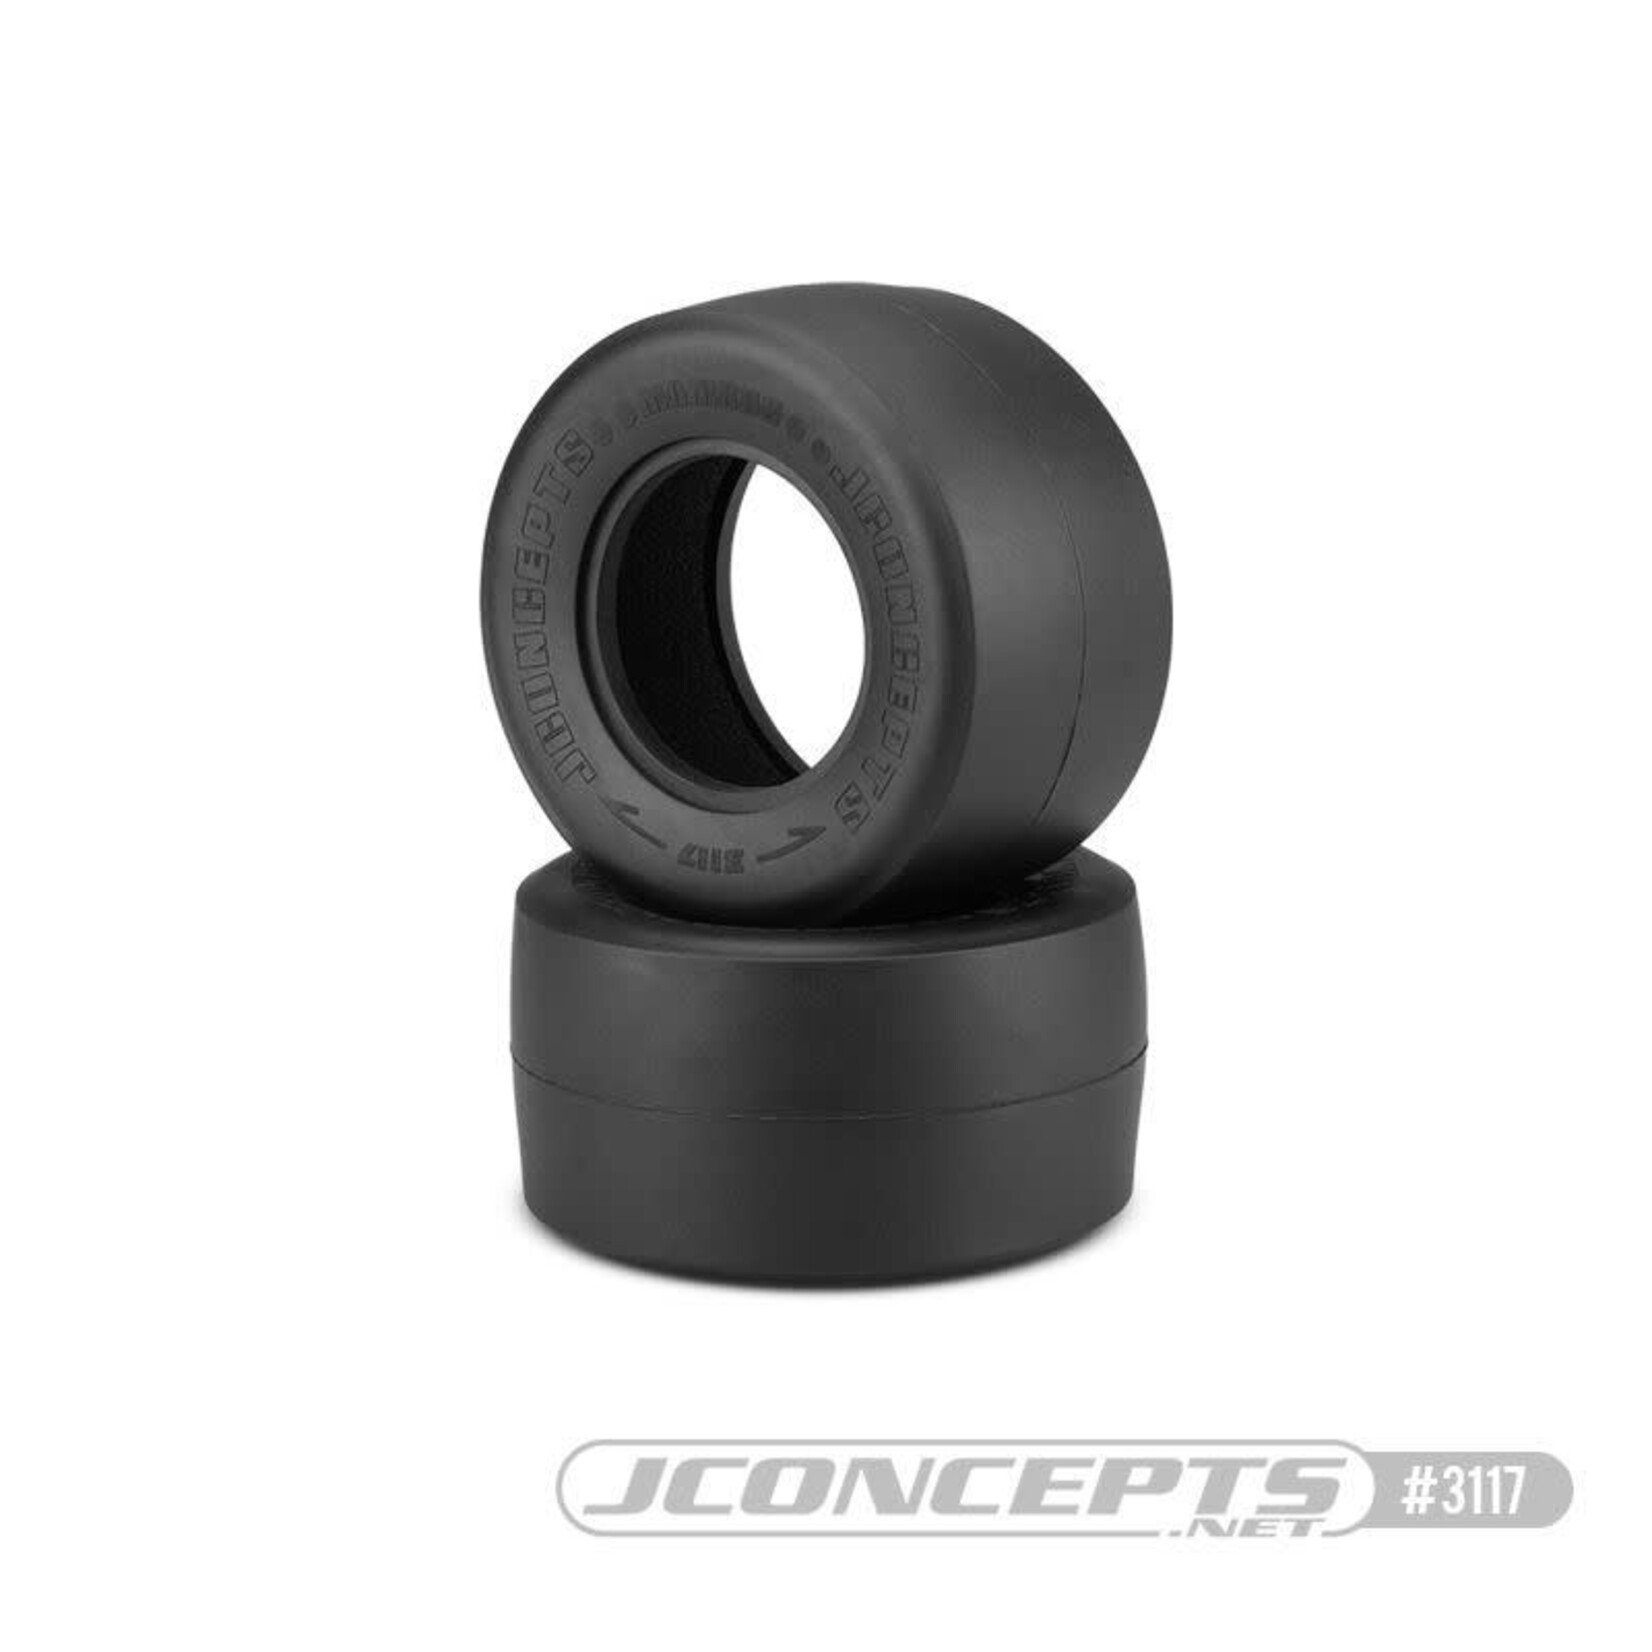 J Concepts 2.2 Mambos Drag Racing Rear Tire - Green Compound